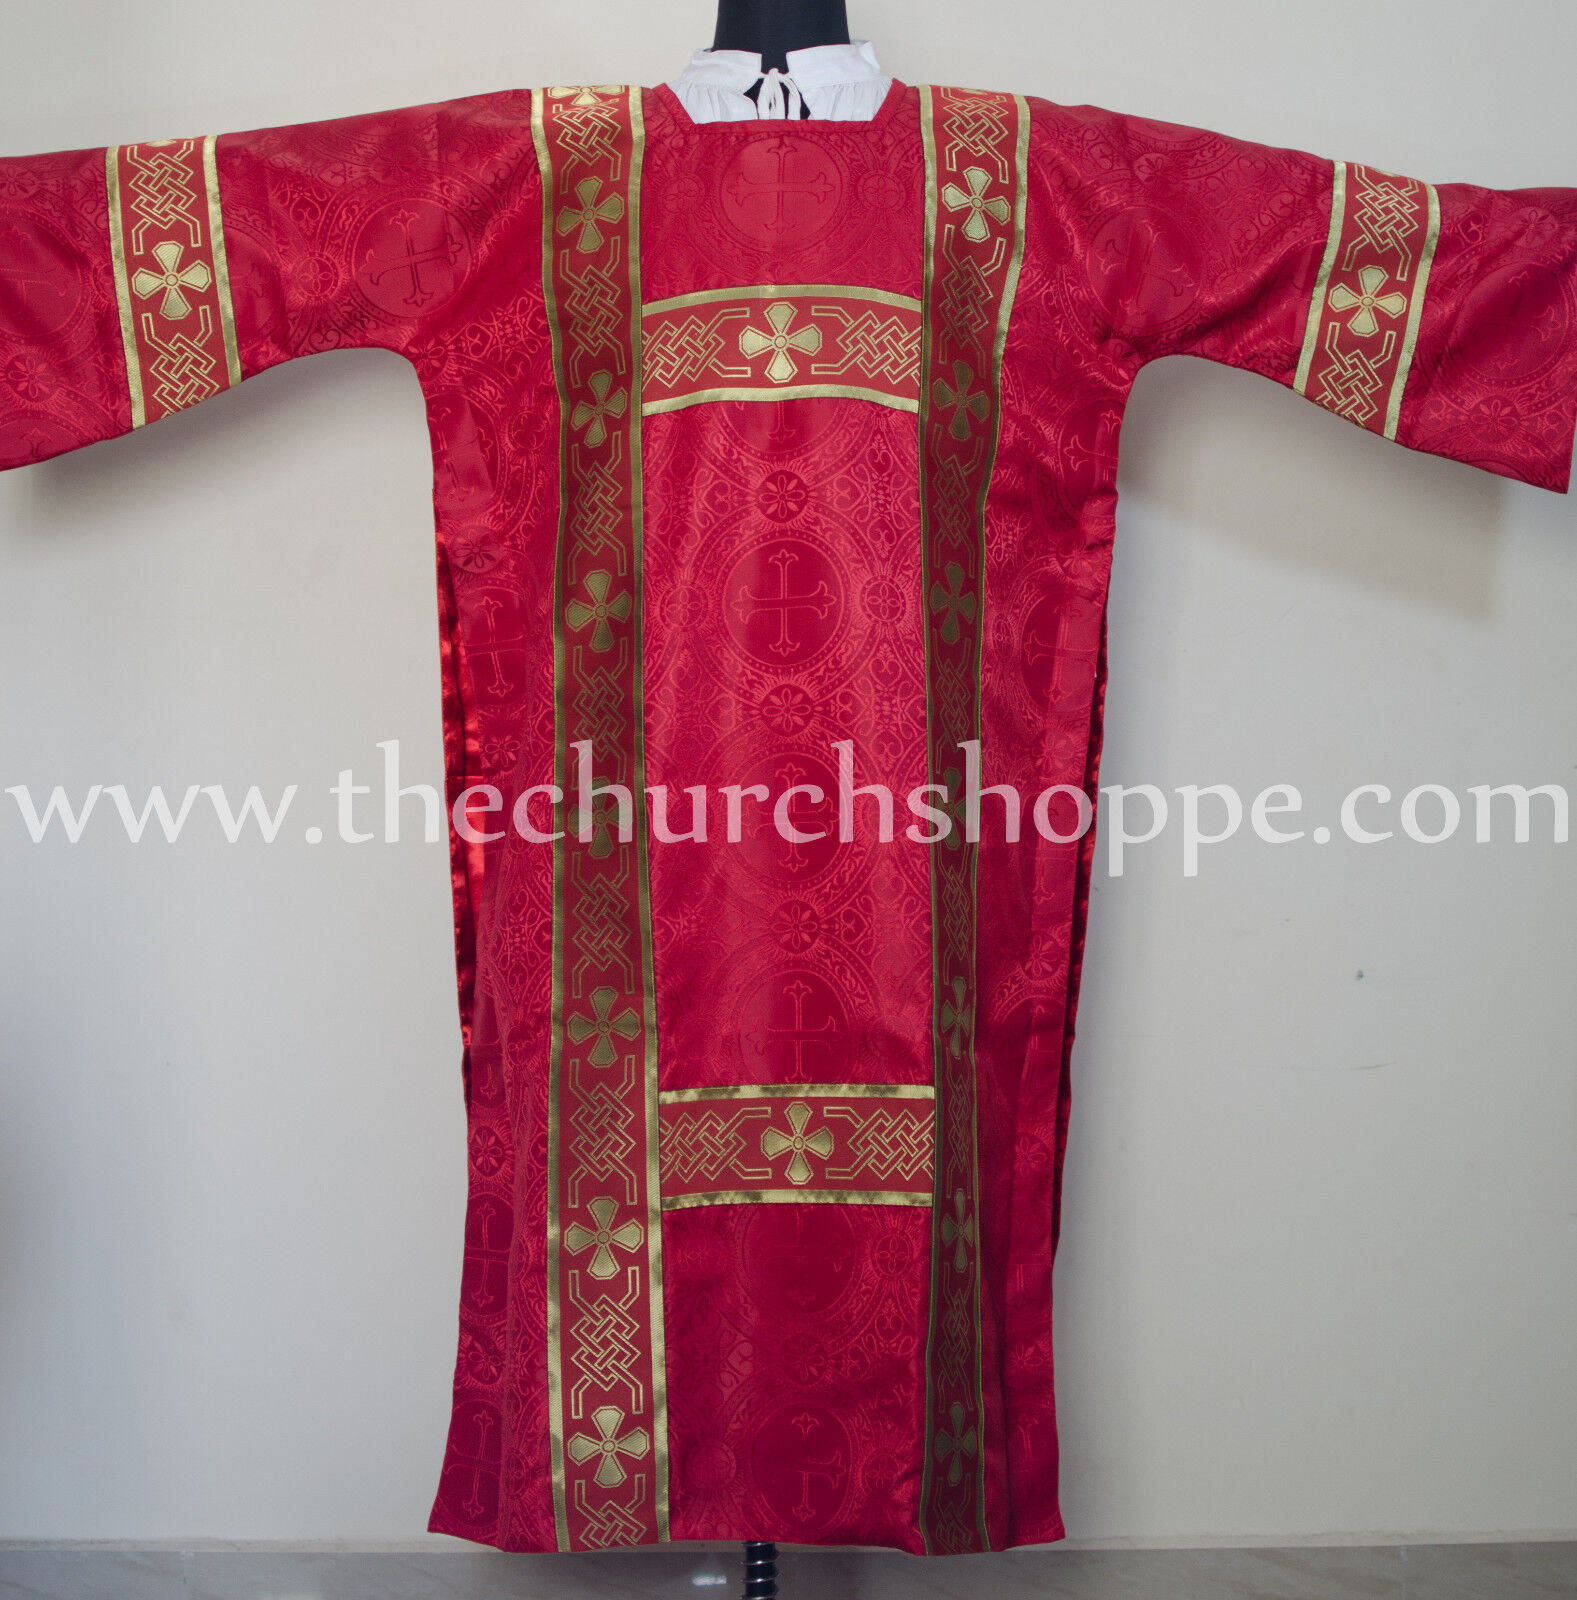 Dalmatic Red vestment with Deacon's stole and maniple lined,Dalmatic chasuble,